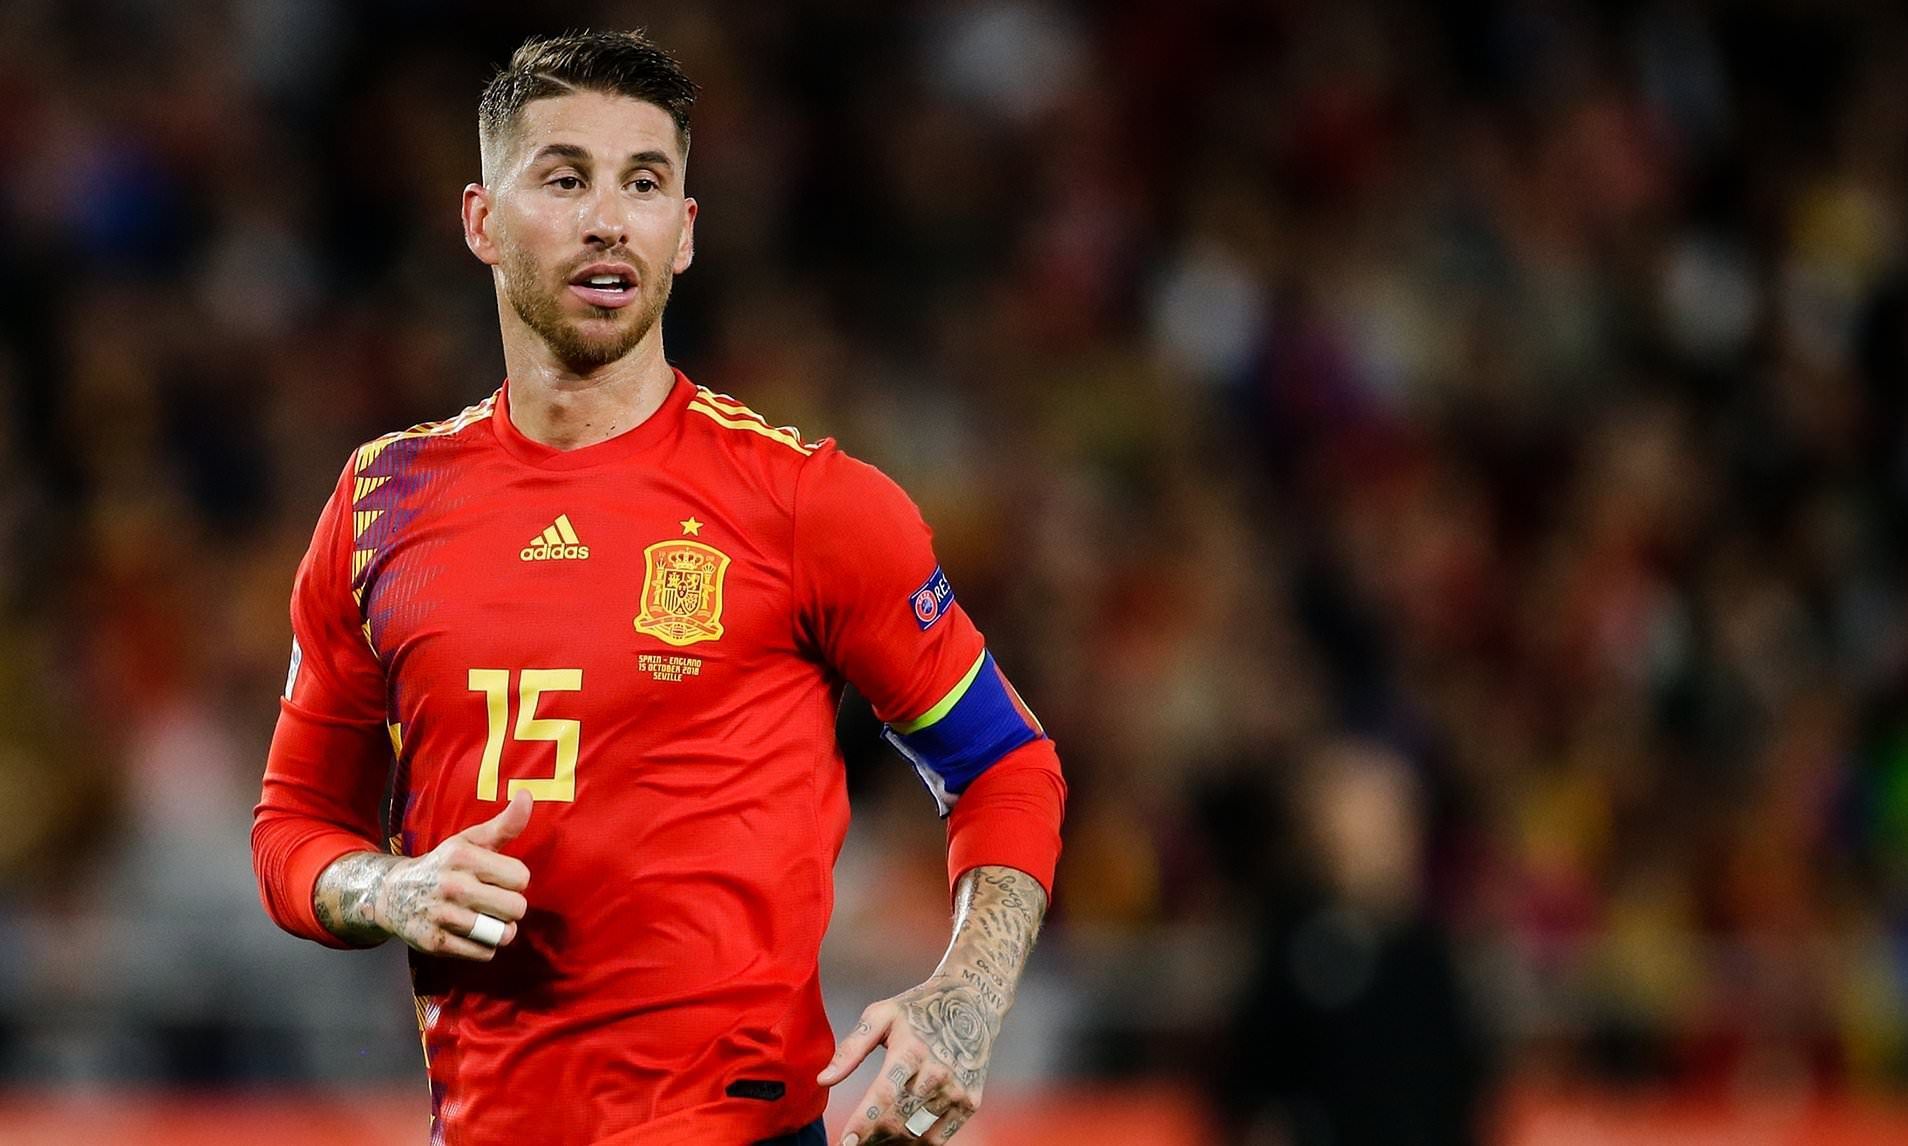 Sergio Ramos excelled as the captain of both Spain and Real Madrid.